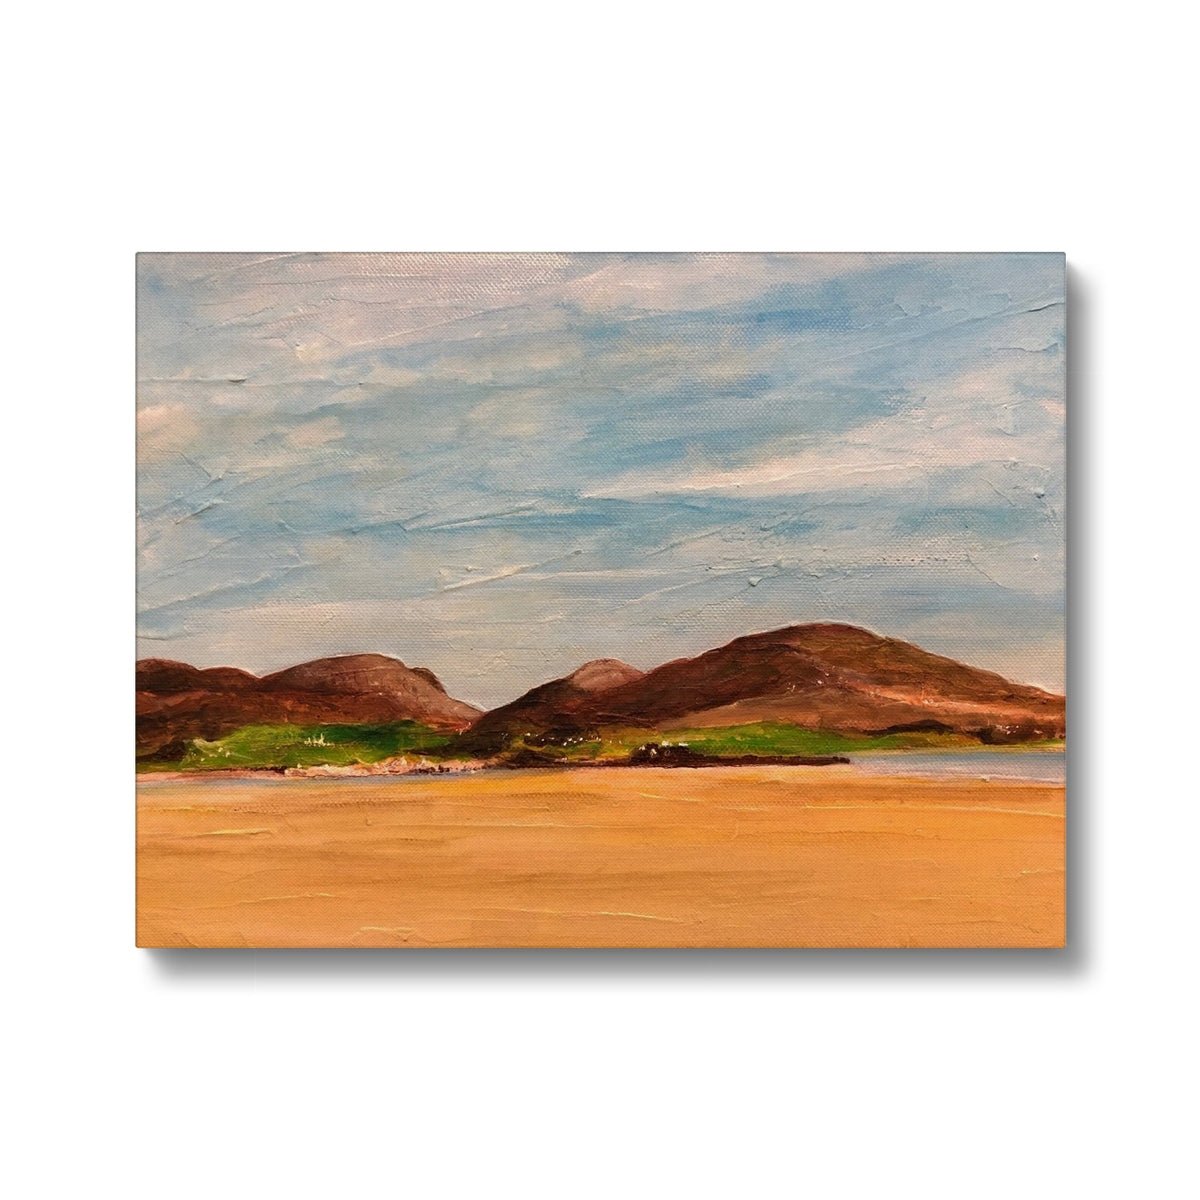 Uig Sands Lewis Painting | Canvas From Scotland-Contemporary Stretched Canvas Prints-Hebridean Islands Art Gallery-16"x12"-Paintings, Prints, Homeware, Art Gifts From Scotland By Scottish Artist Kevin Hunter